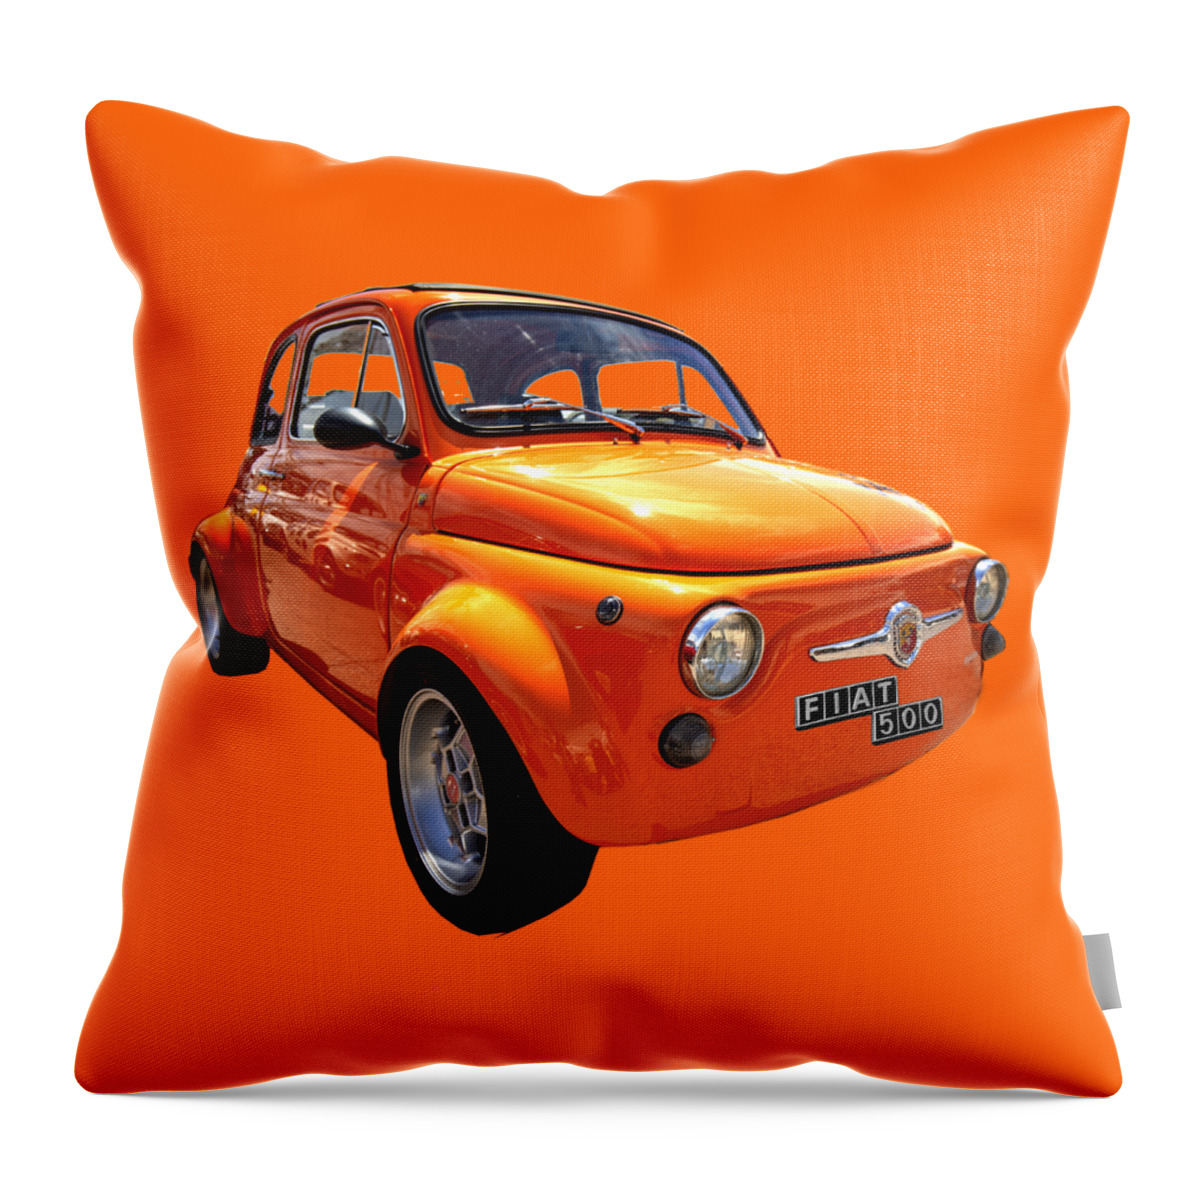 Fiat 500 Throw Pillow featuring the photograph Fiat 500 Orange by Worldwide Photography